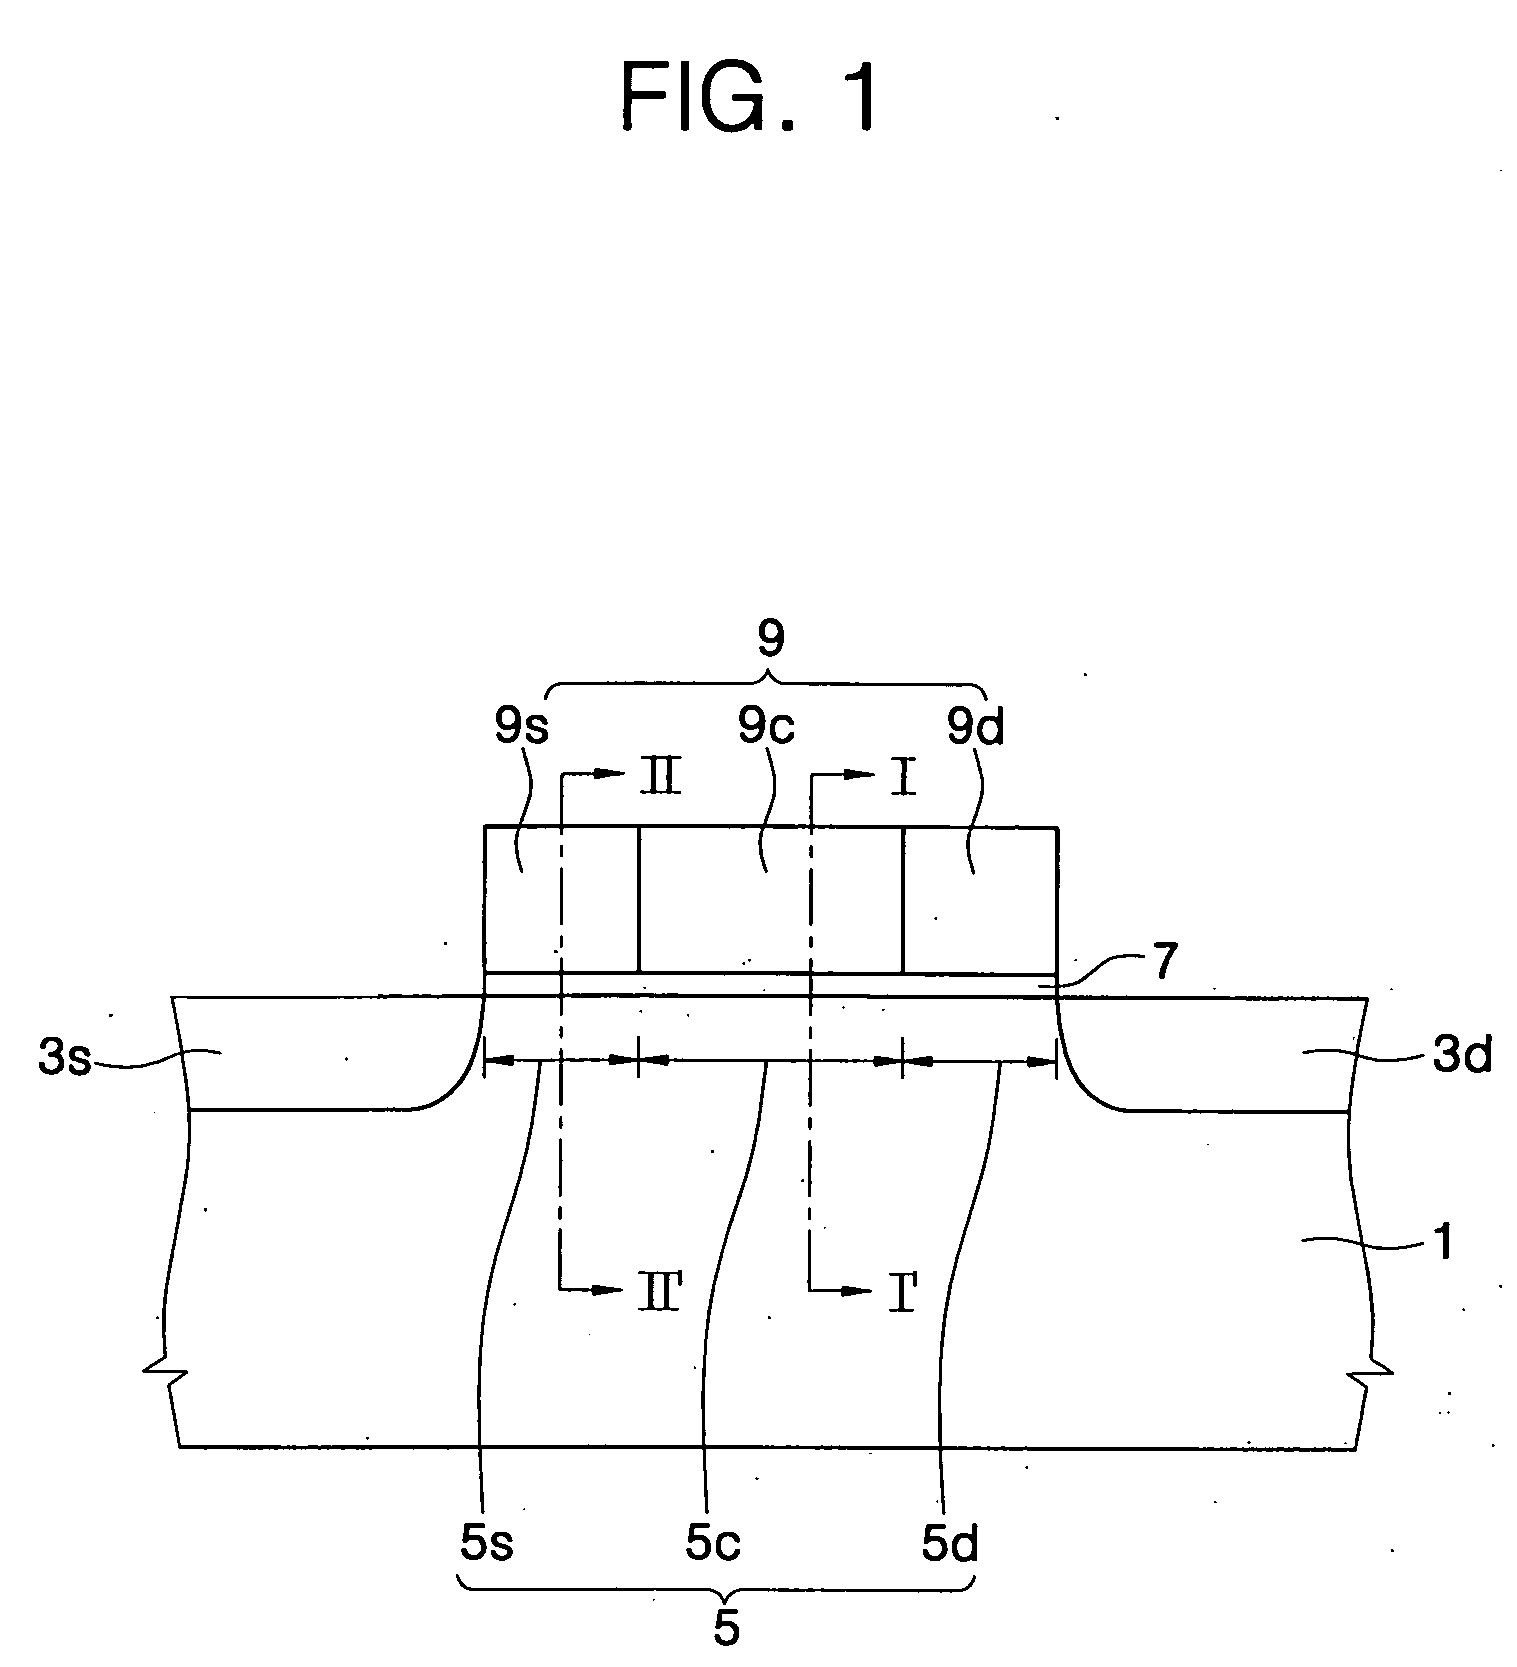 MOS transistor including multi-work function metal nitride gate electrode, COMS integrated circuit device including same, and related methods of manufacture